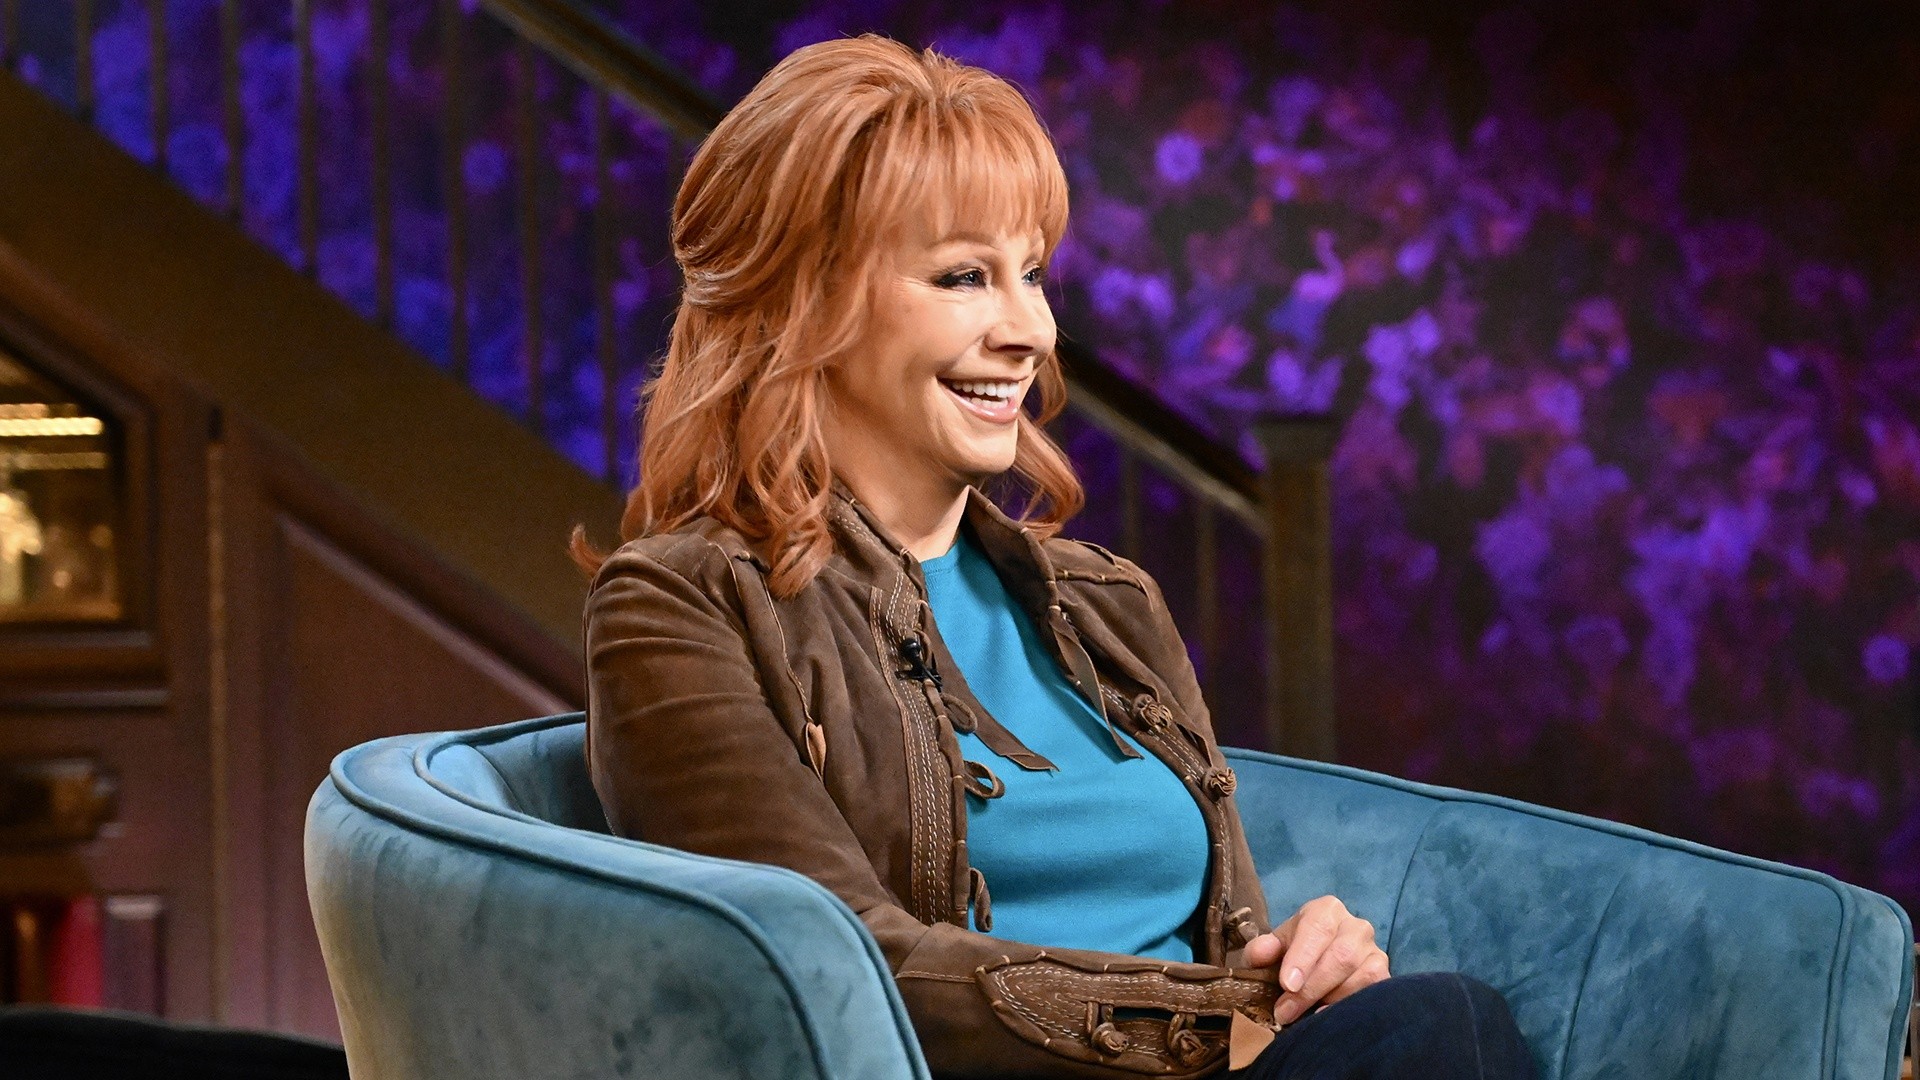 What a performance from @NBC's The Voice coaches @Reba McEntire @Gwen , The Voice